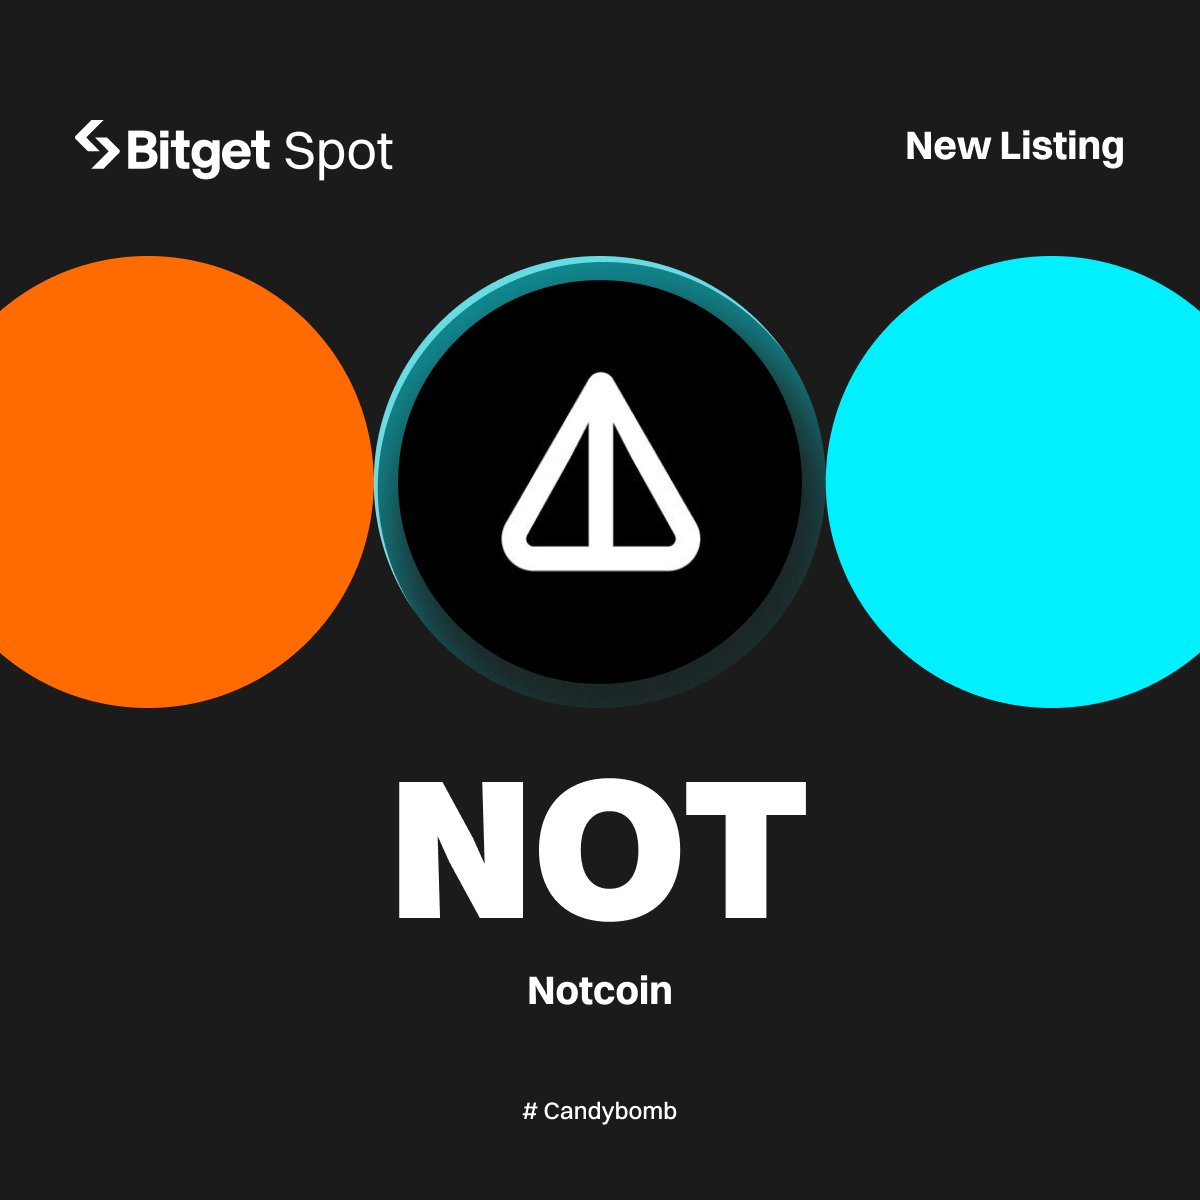 Initial Listing - $NOT @thenotcoin

#Bitget will list NOT/USDT with $40,000 worth of NOT up for grabs! #NOTlistBitget

🔹Deposit: opened
🔹Trading starts: May 16, 12:00 PM (UTC)

More details: bitget.com/en/support/art…